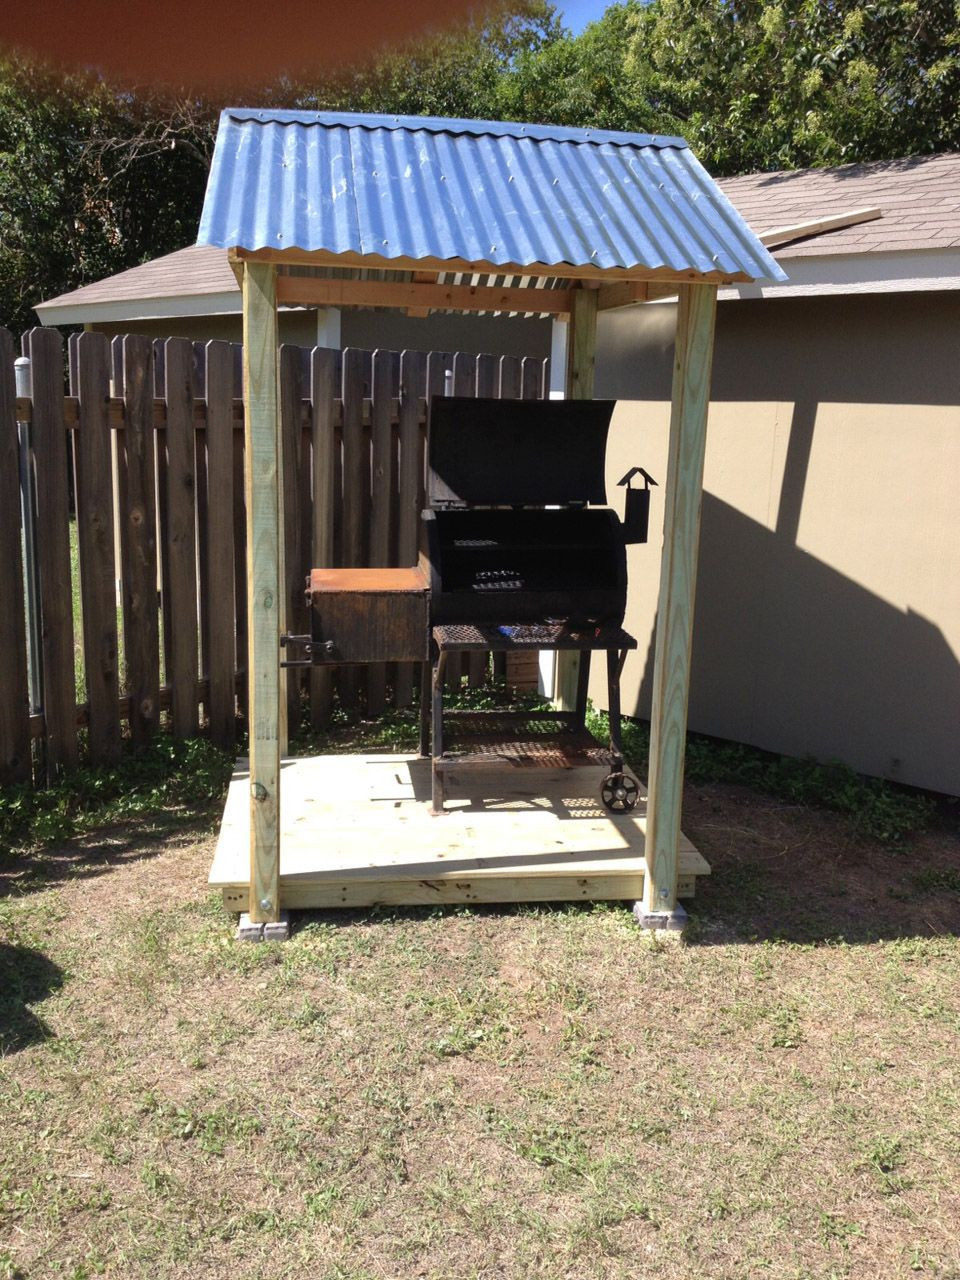 Backyard Grill Cover
 Check out this DIY bbq pit cover made by Eric Gentry in